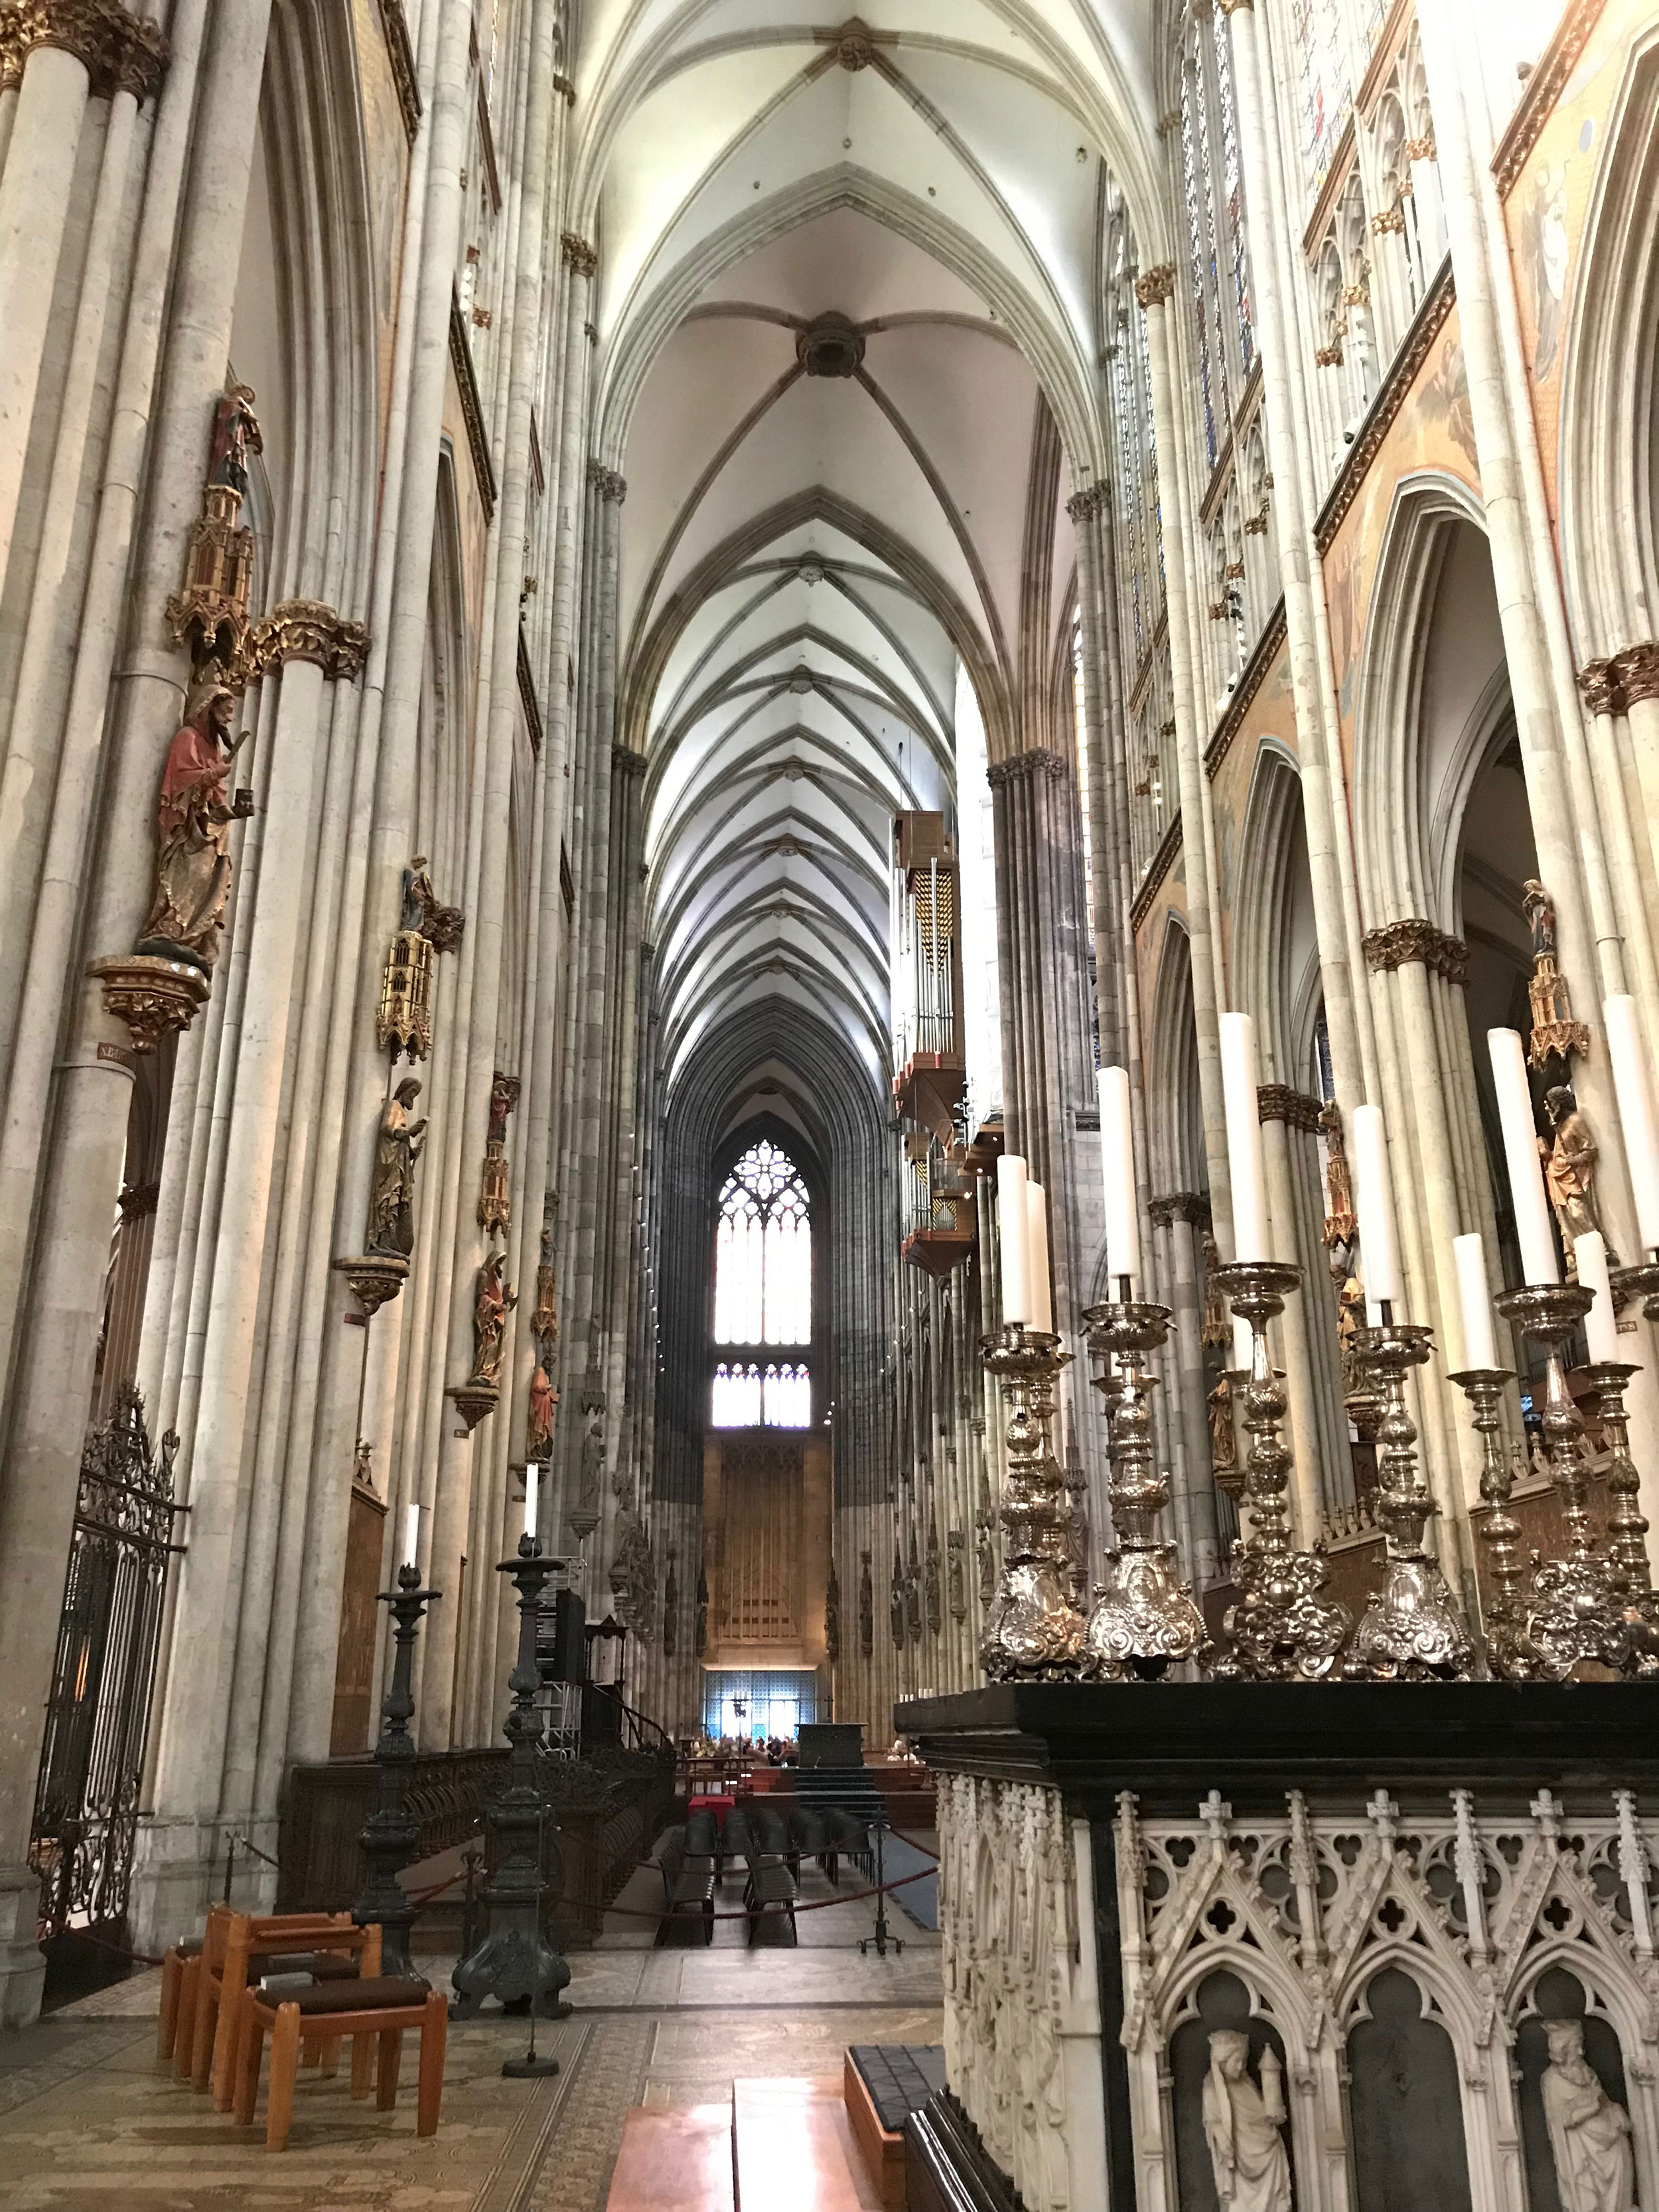 Inside the Cologne Cathedral in Germany